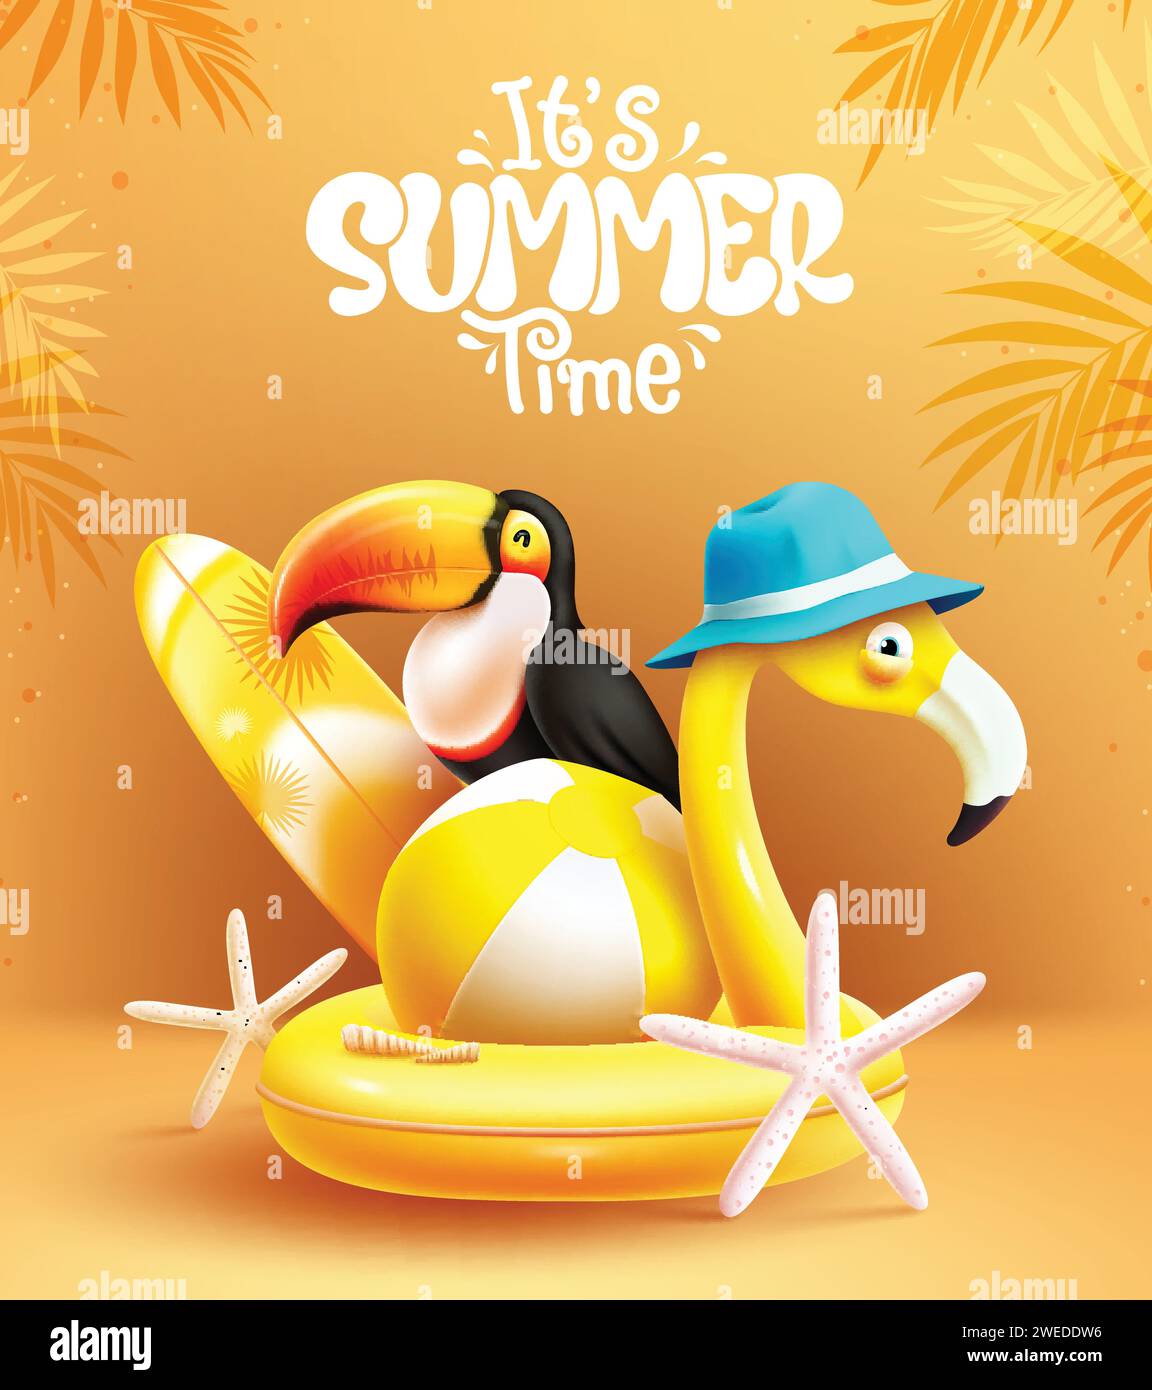 Summer time text vector design. It's summer time greeting with flamingo, toucan, surfboard and beachball beach elements in yellow background. Vector Stock Vector